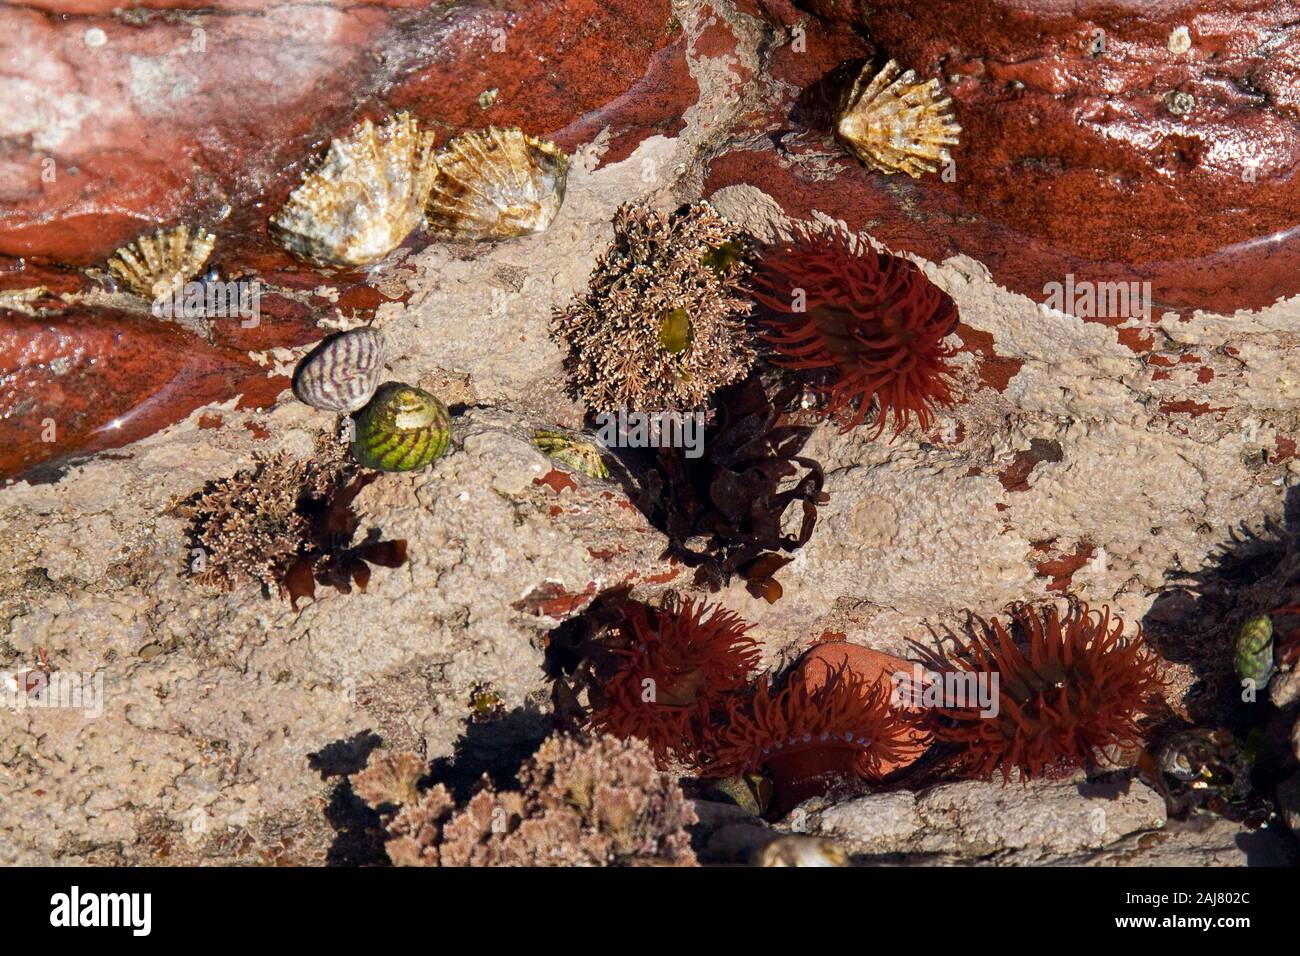 A rock pool, Pembrokeshire, with anemones, top shells, algae and limpets, Stock Photo